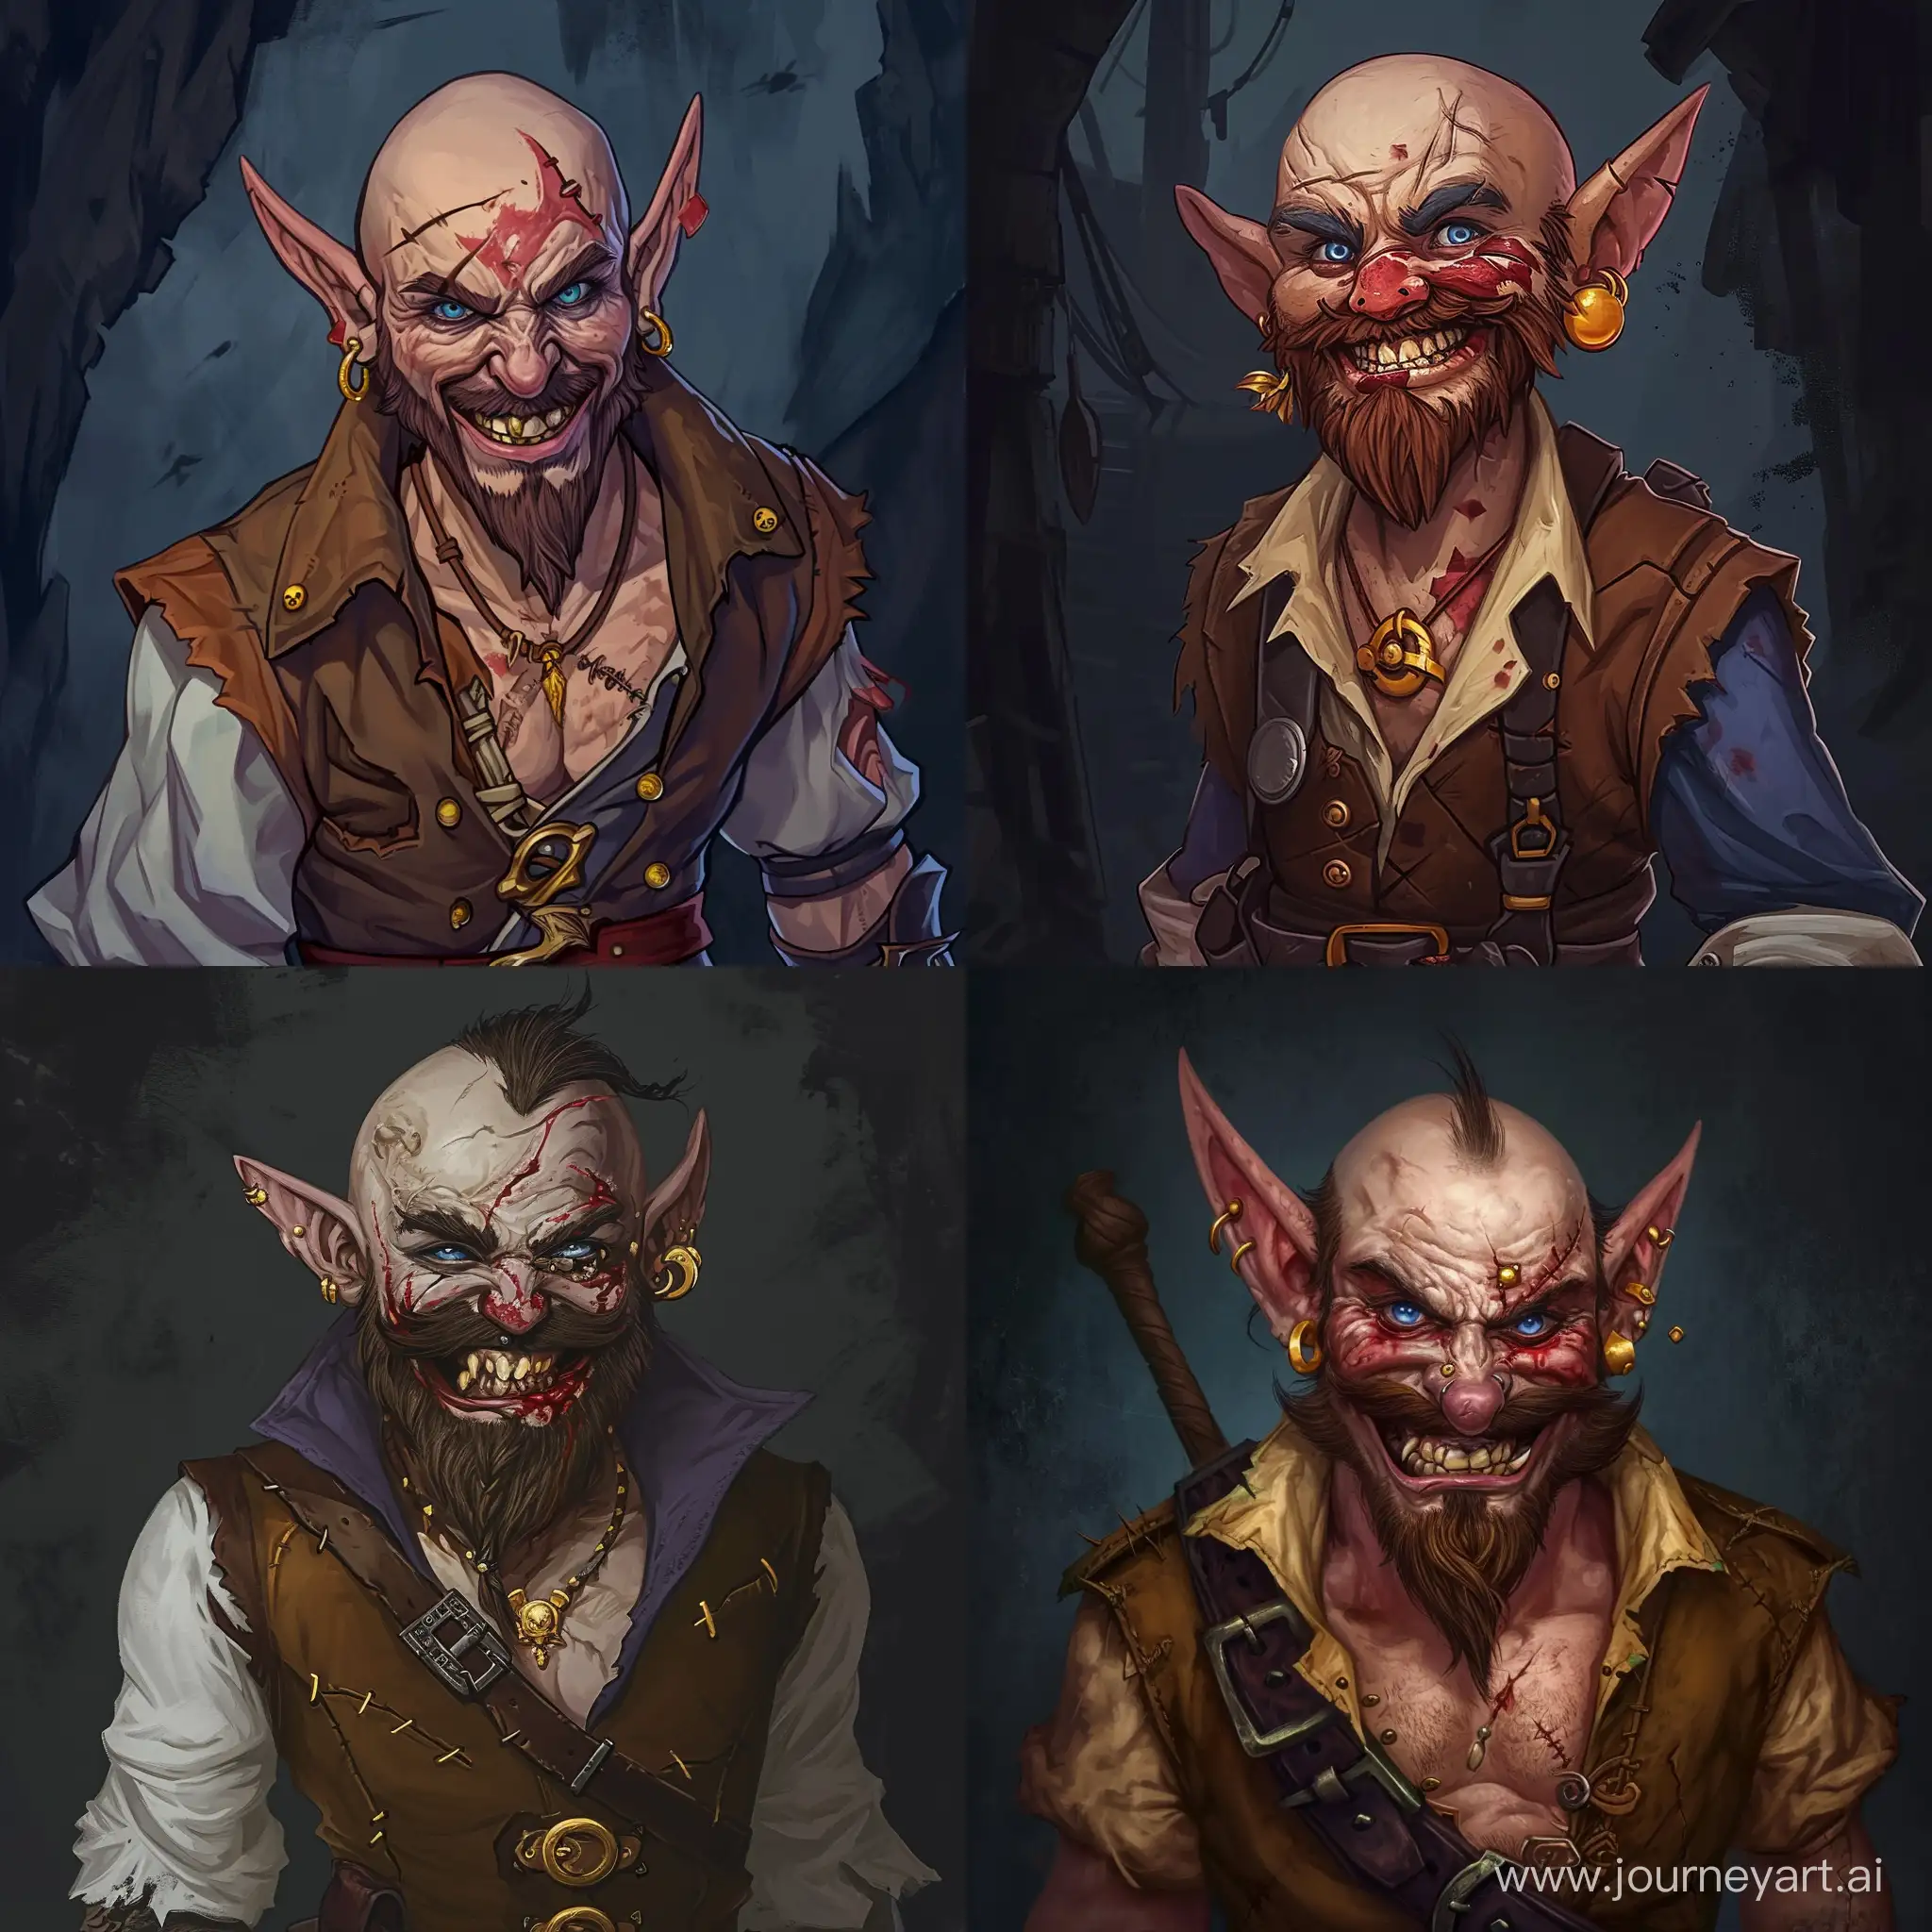 Half-elf, ears are not big, pirate, red scar, scarface, scar on face, big scar, WARLOCK, POOR CLOATHES brown pirate vest, bald, no hair on head, big beard with mustache, brown hair, blue eyes, one gold tooth, angry with a smile, SMILE WITH TEETHS, conjures fire magic, dark gloomy background, young, ears are not big, one golden earring, anime style